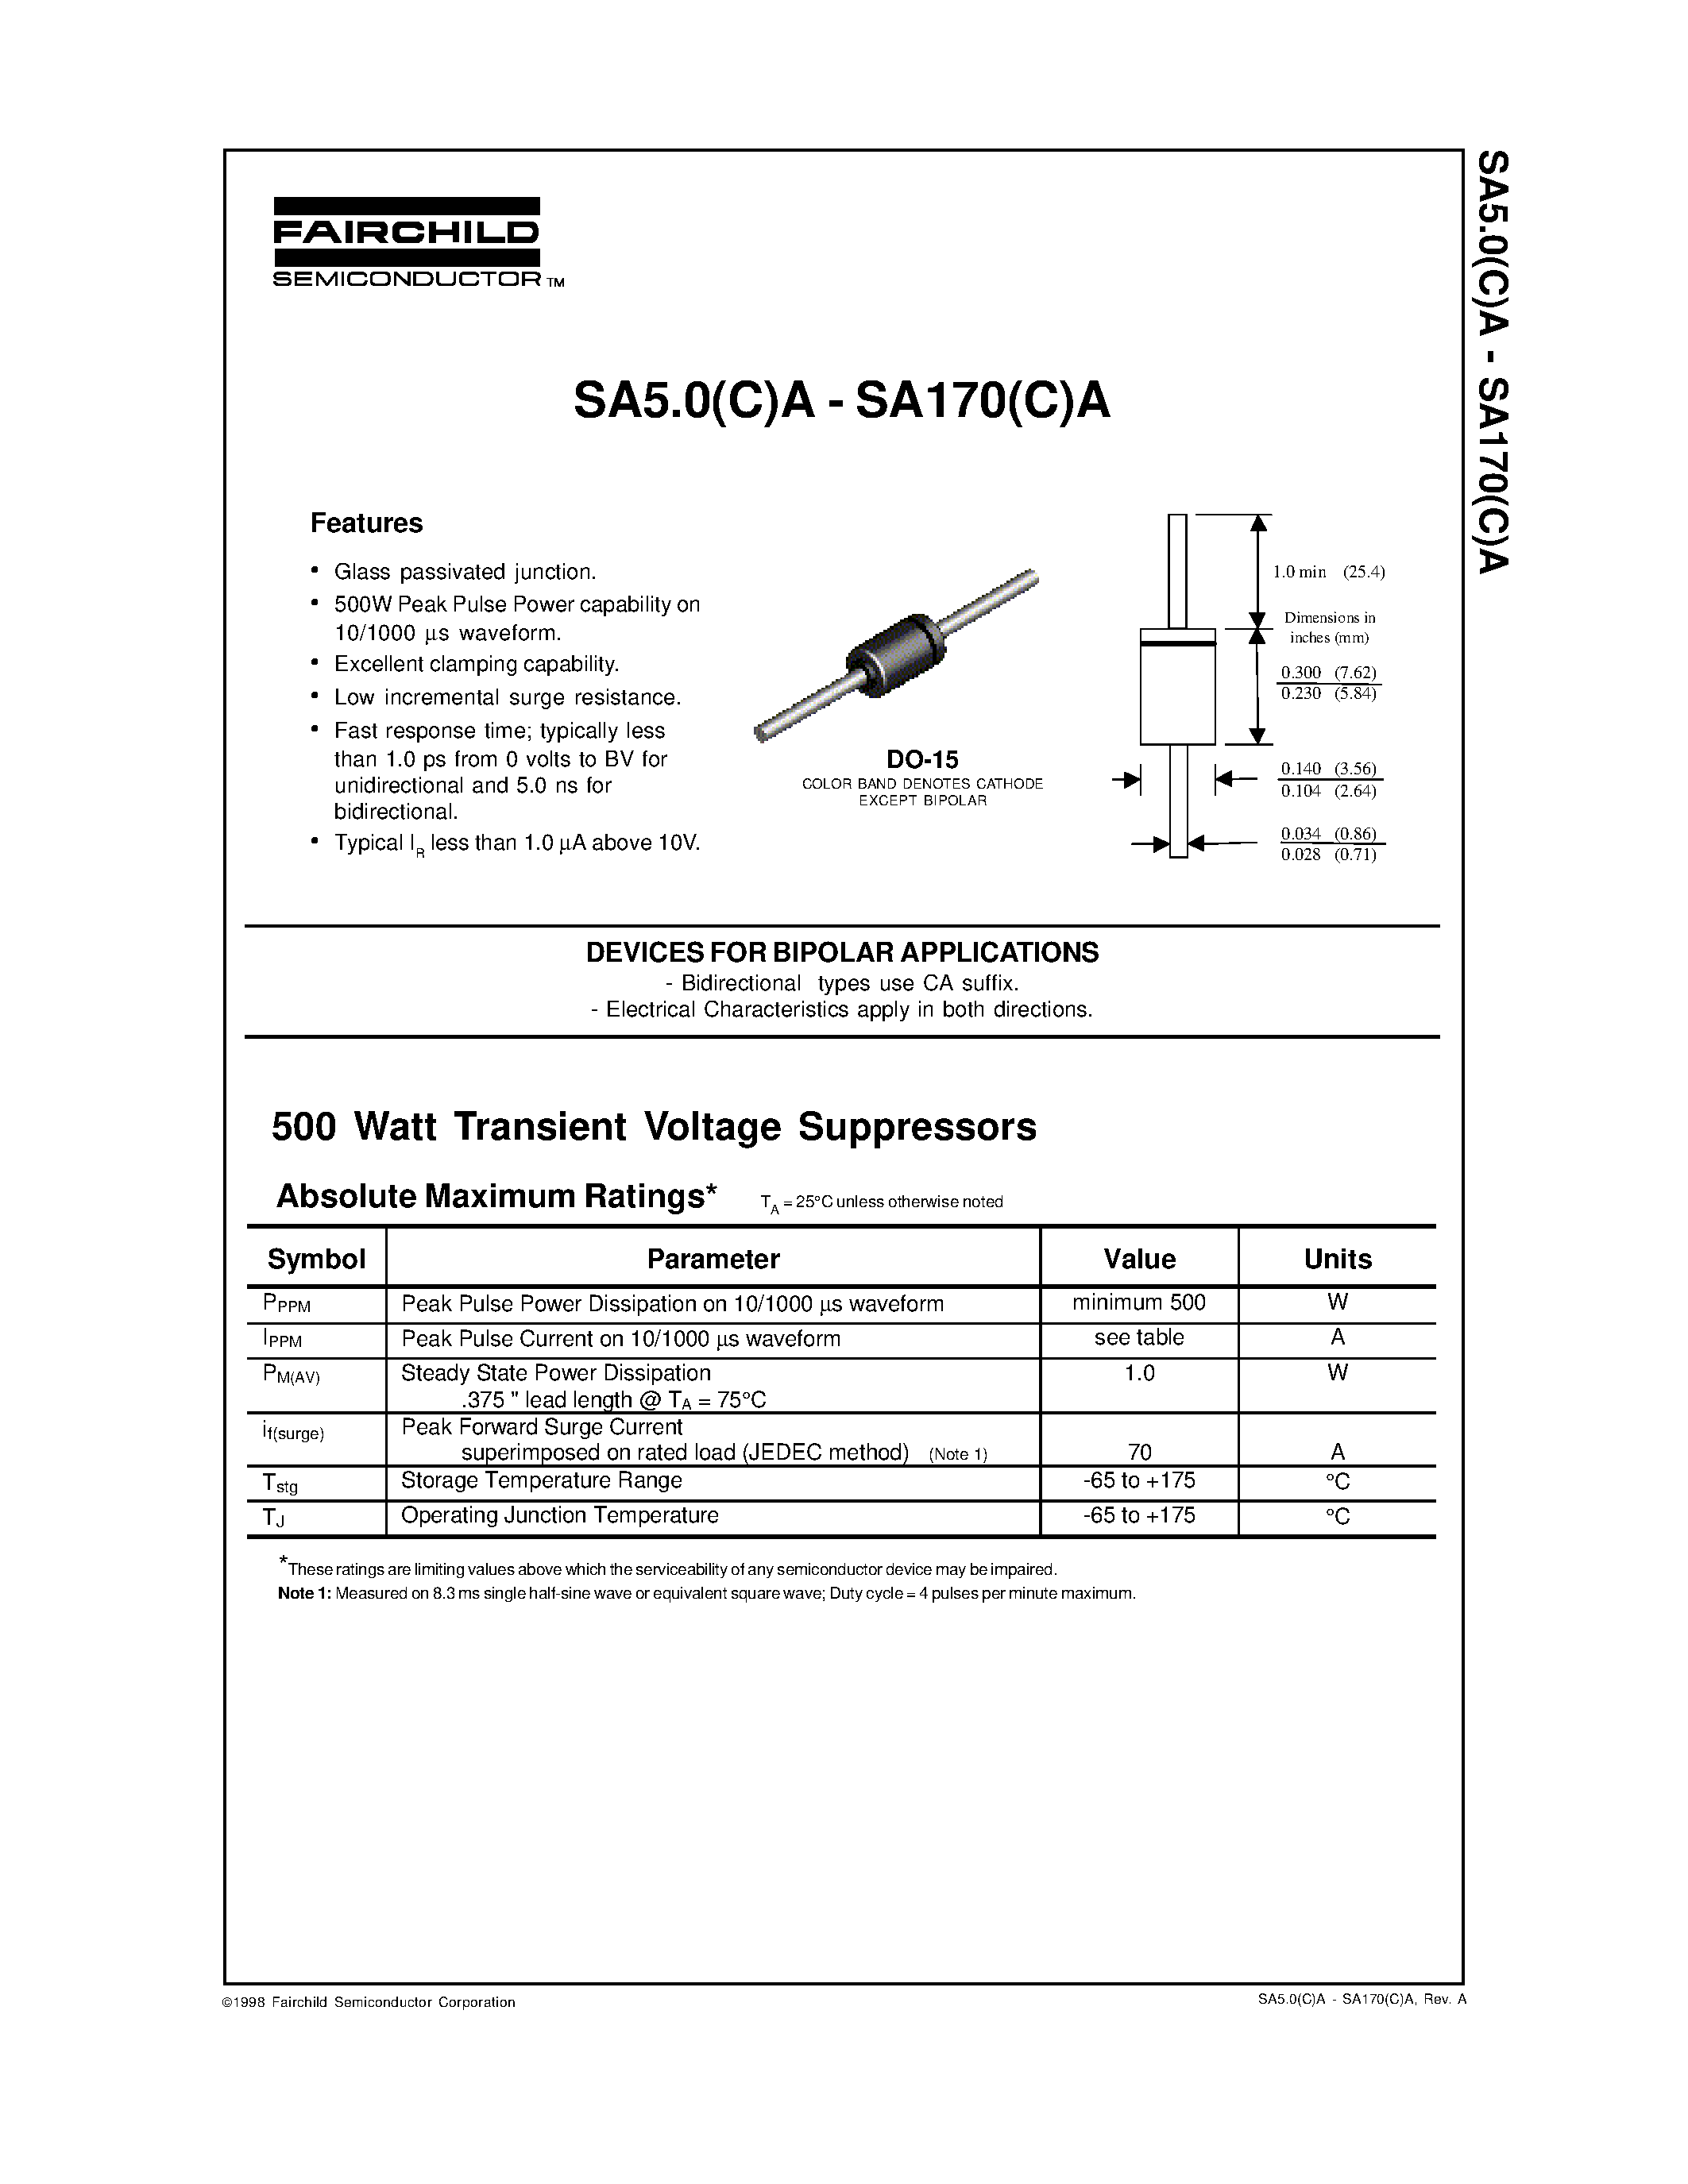 Datasheet SA33(C)A - DEVICES FOR BIPOLAR APPLICATIONS page 1